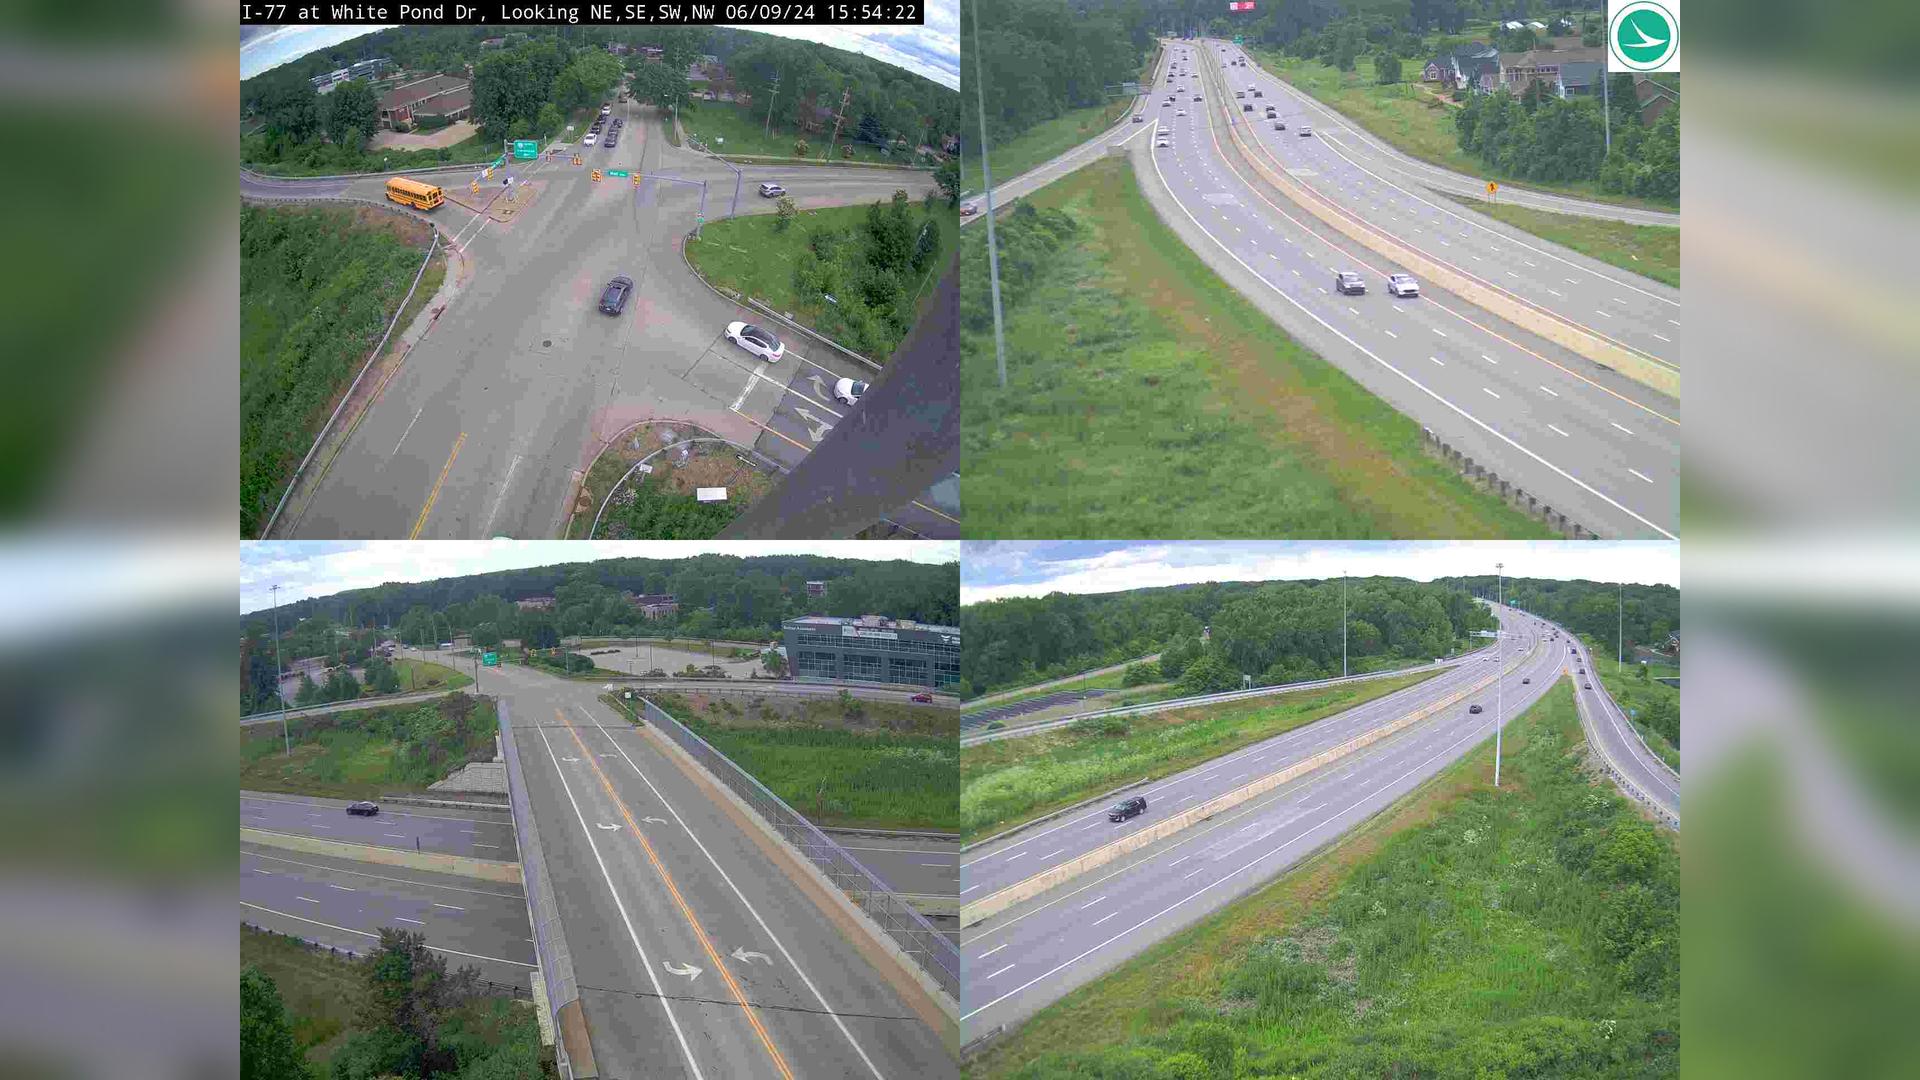 Traffic Cam Fairlawn Heights: I-77 at White Pond Dr